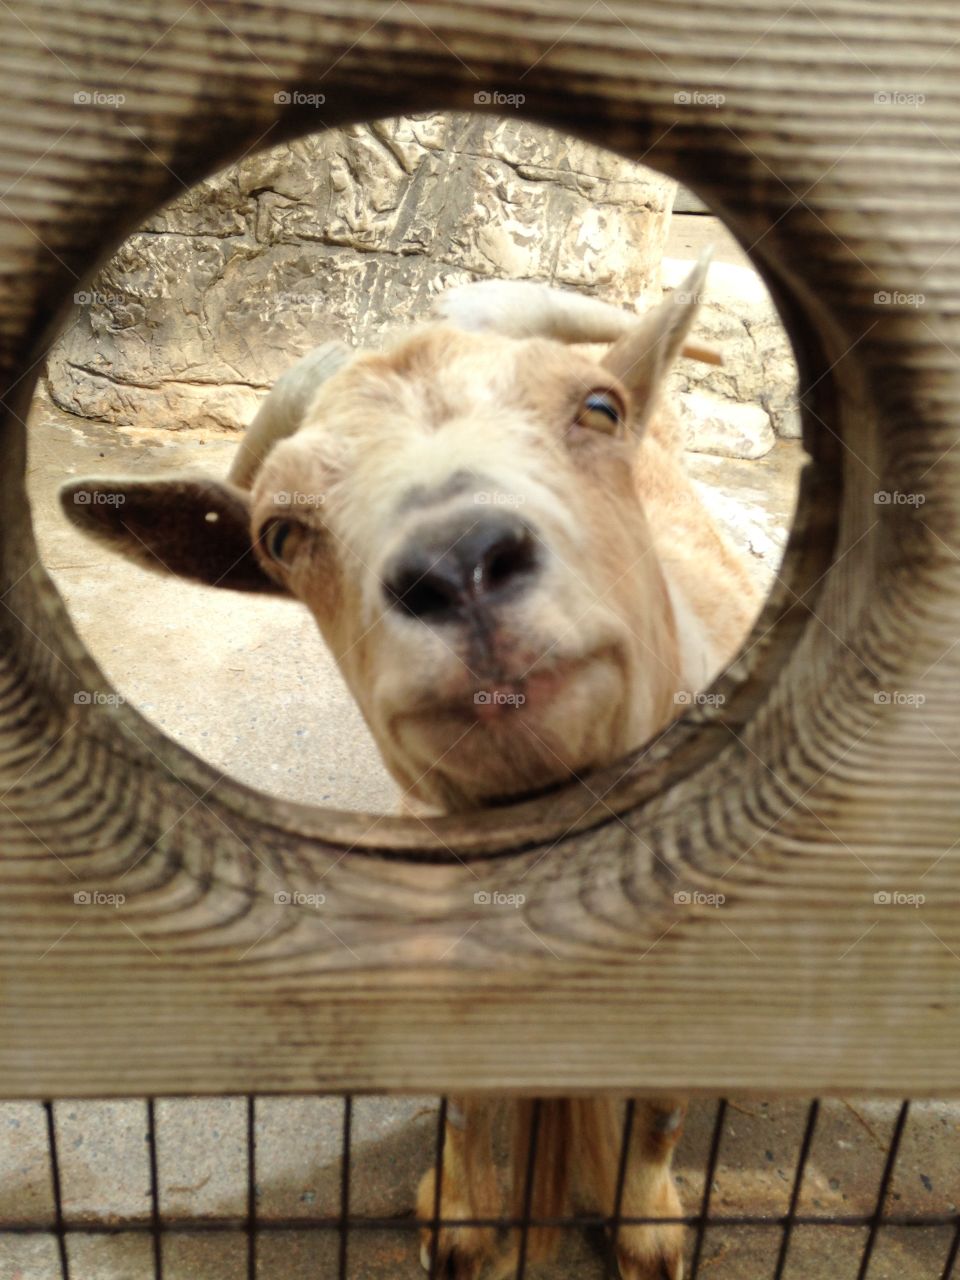 Billy goat at the zoo